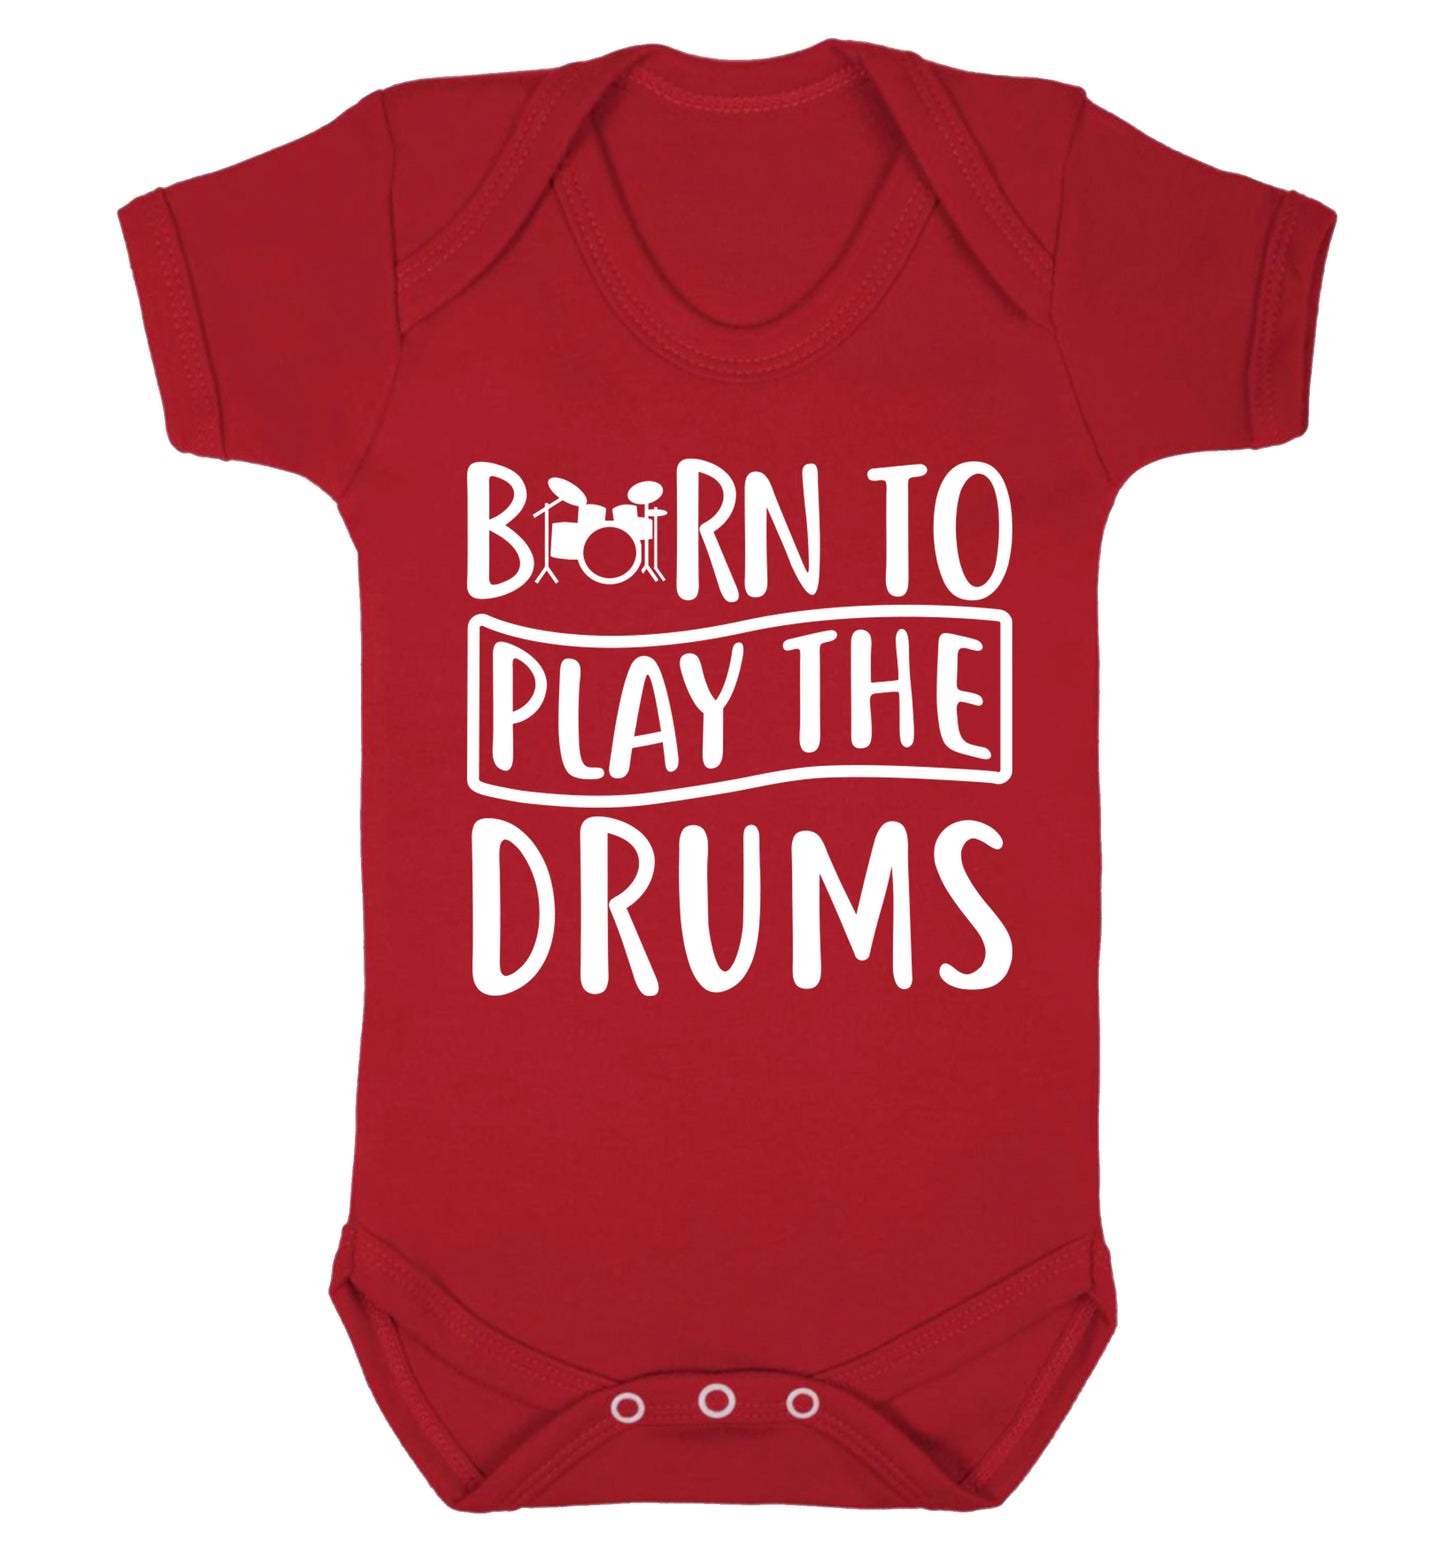 Born to play the drums Baby Vest red 18-24 months